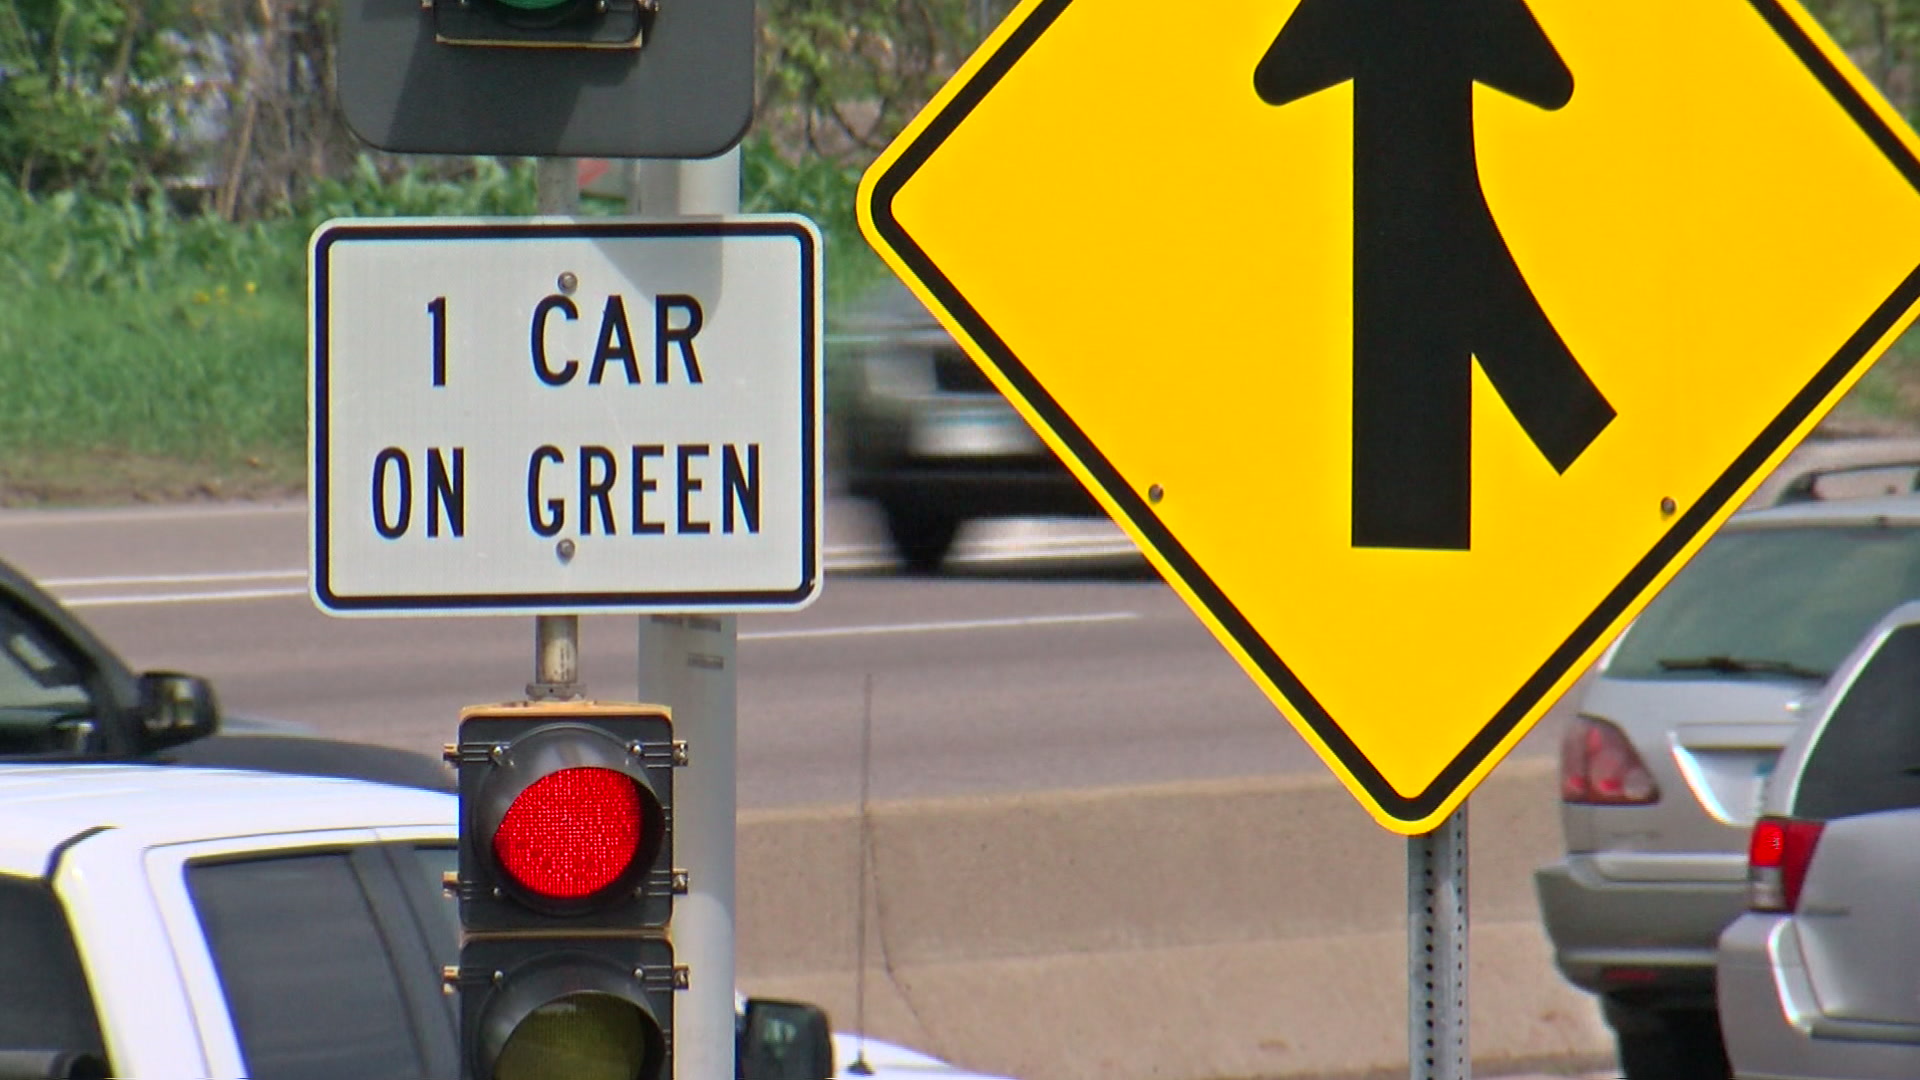 What Are The Benefits Of Ramp Meters? – WCCO